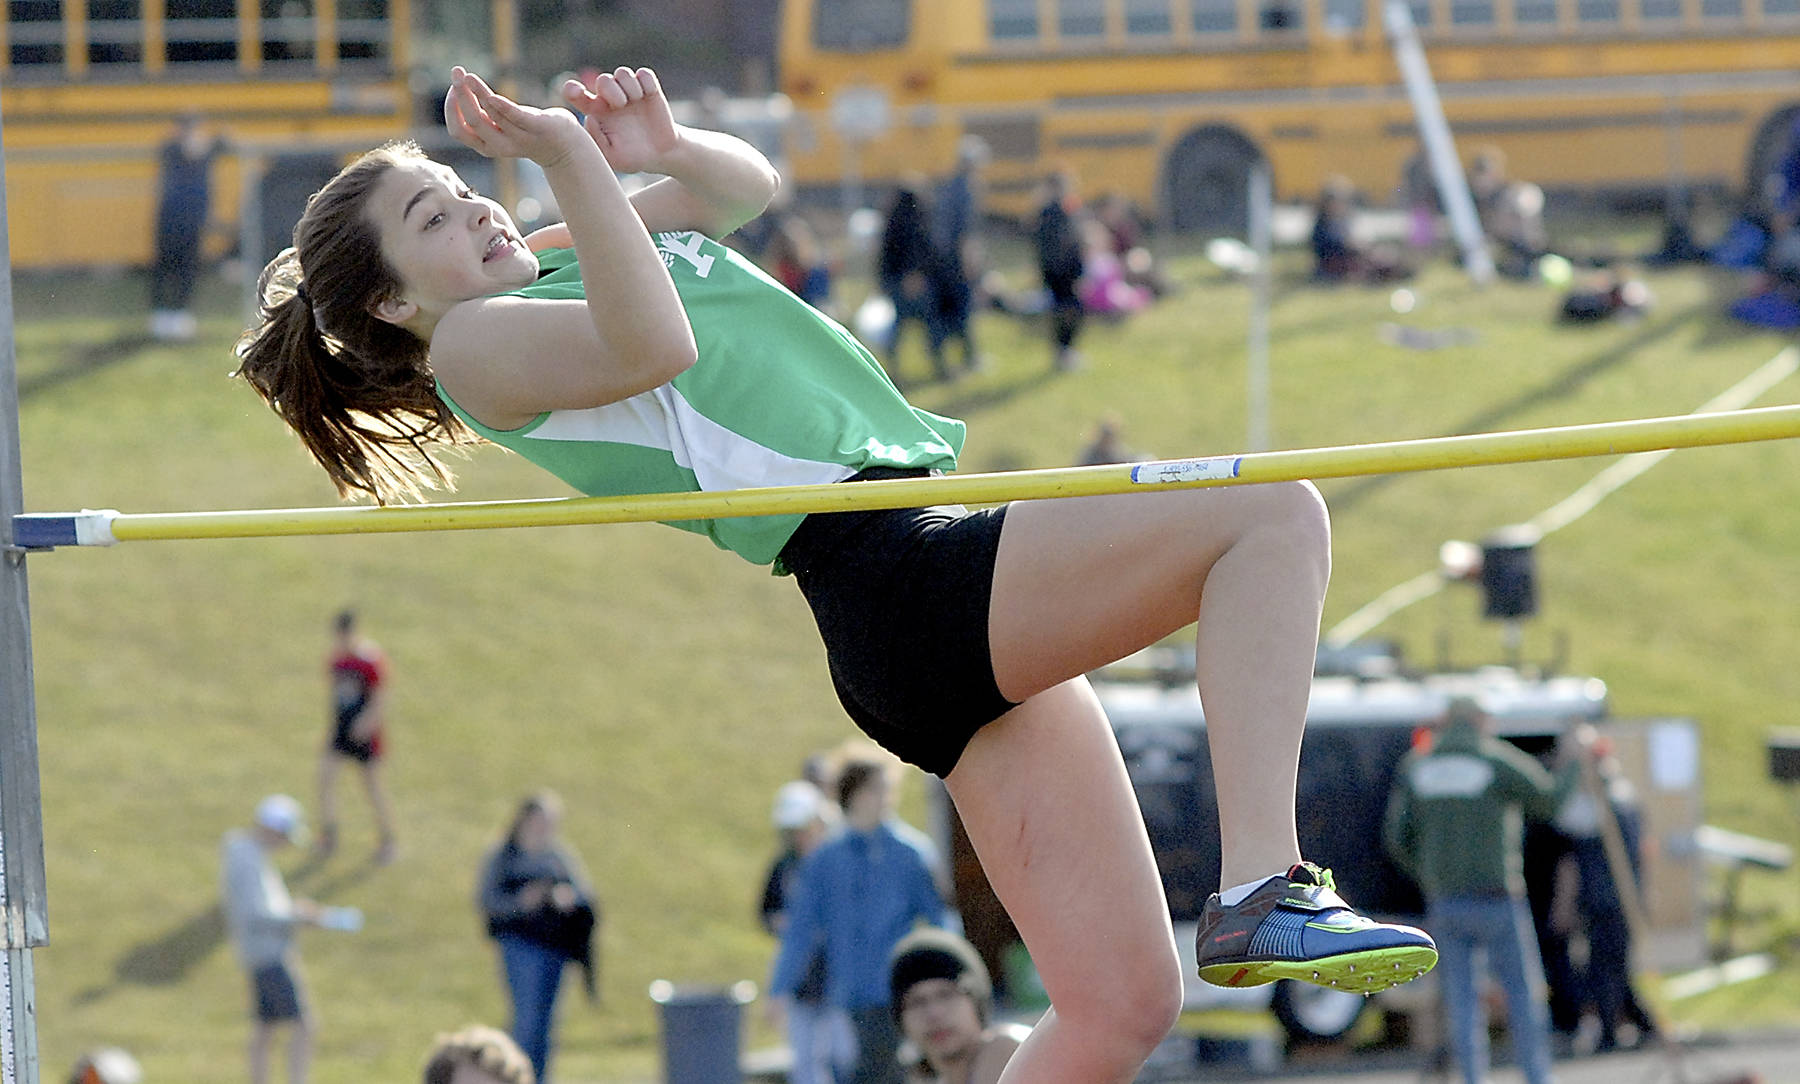 Keith Thorpe/Peninsula Daily News Port Angeles freshman Eve Burke won the girls high jump by clearing 4-feet, 10 inches during the Retro Flying A Meet at Port Angeles High School on Thursday.